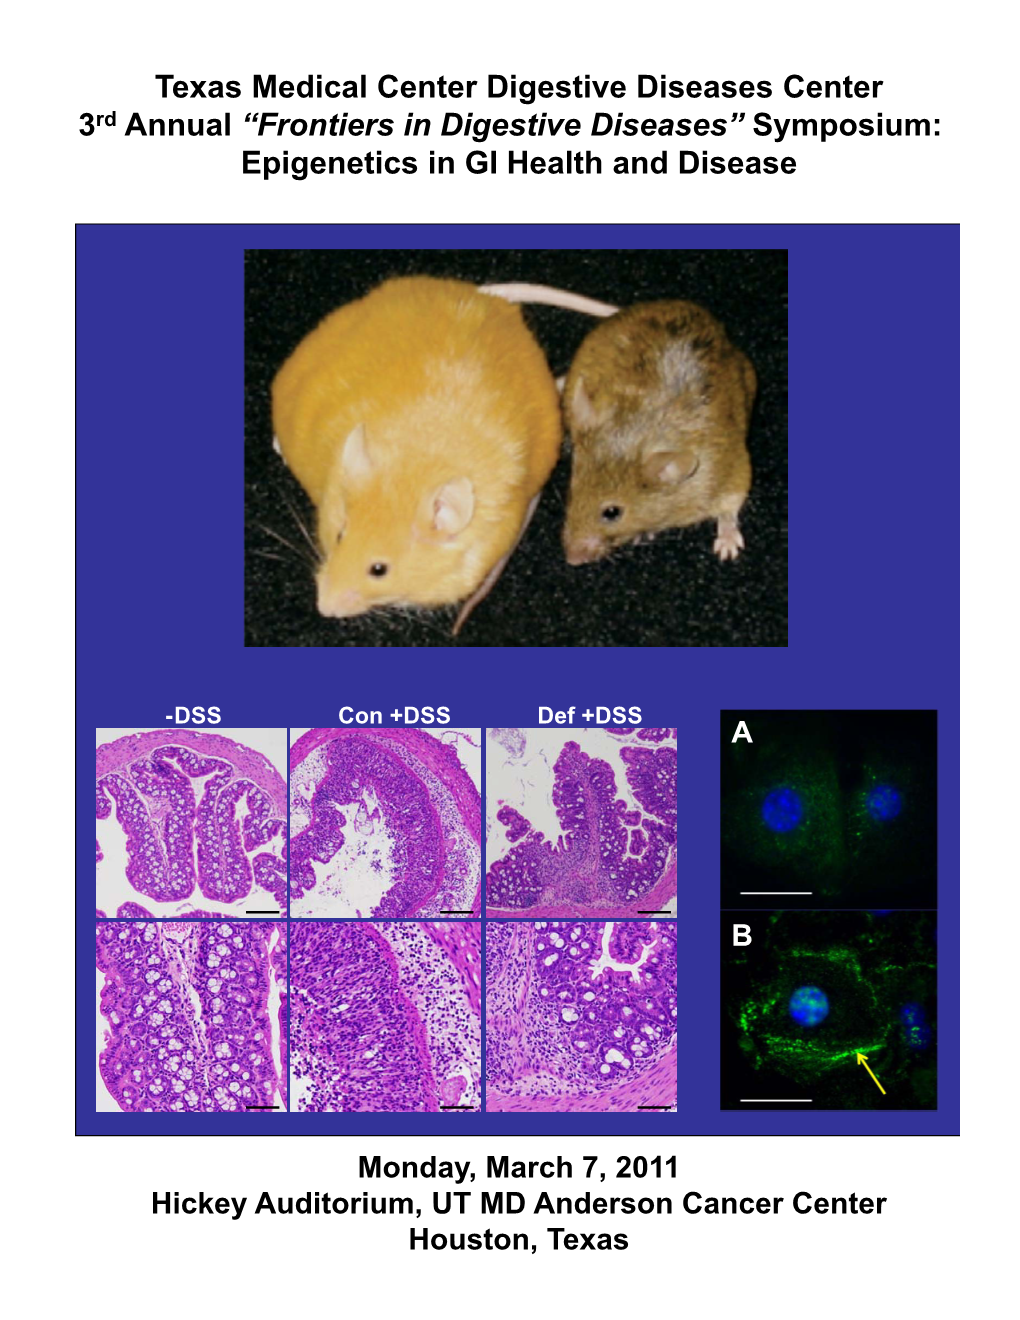 (2010) Infection in GI Health and Disease